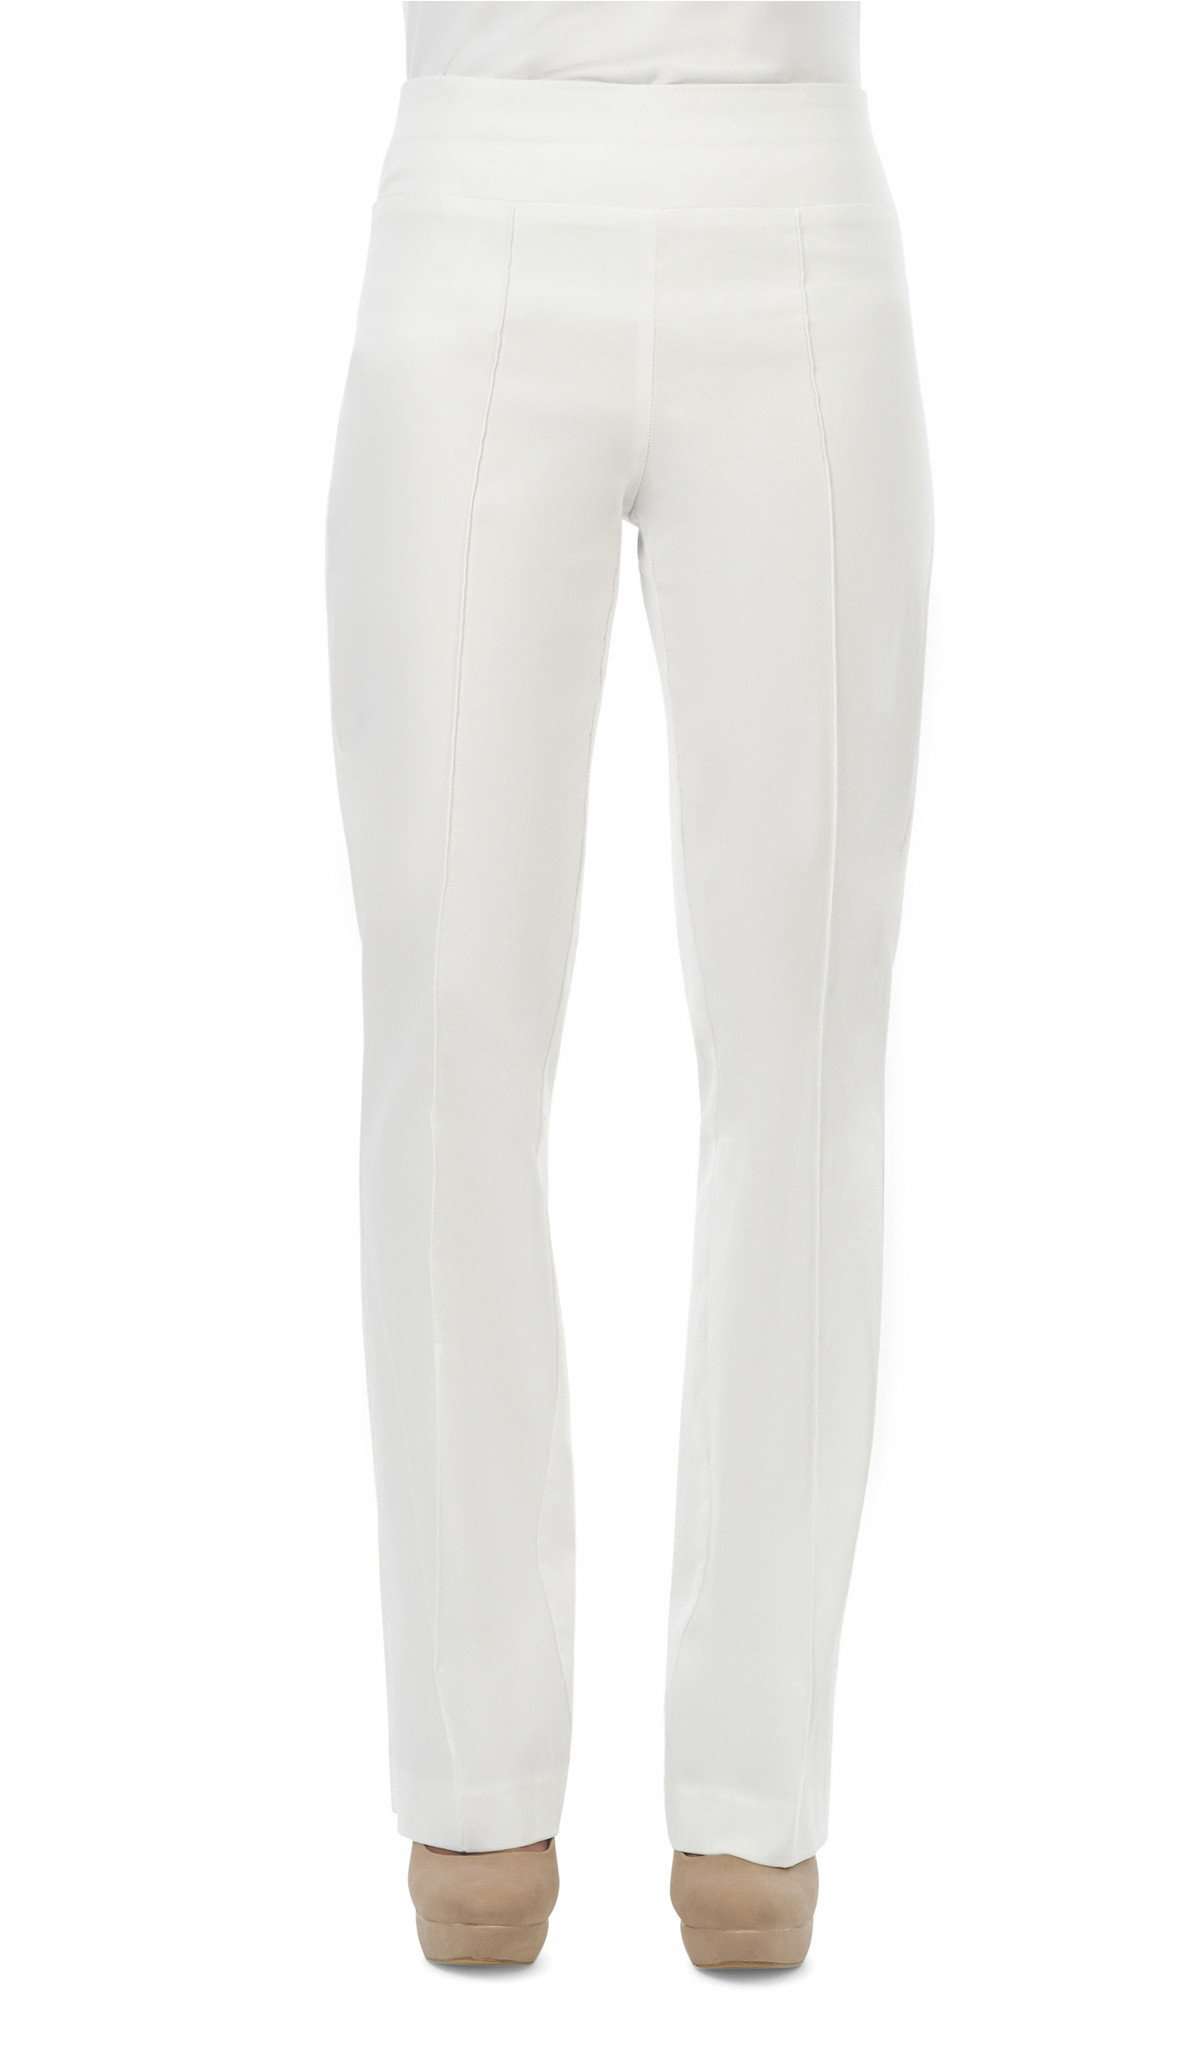 Women's Pants White Stretch Pant Our "Miracle Fit" Quality Stretch Fabric Made in Canada Yvonne Marie - Yvonne Marie - Yvonne Marie